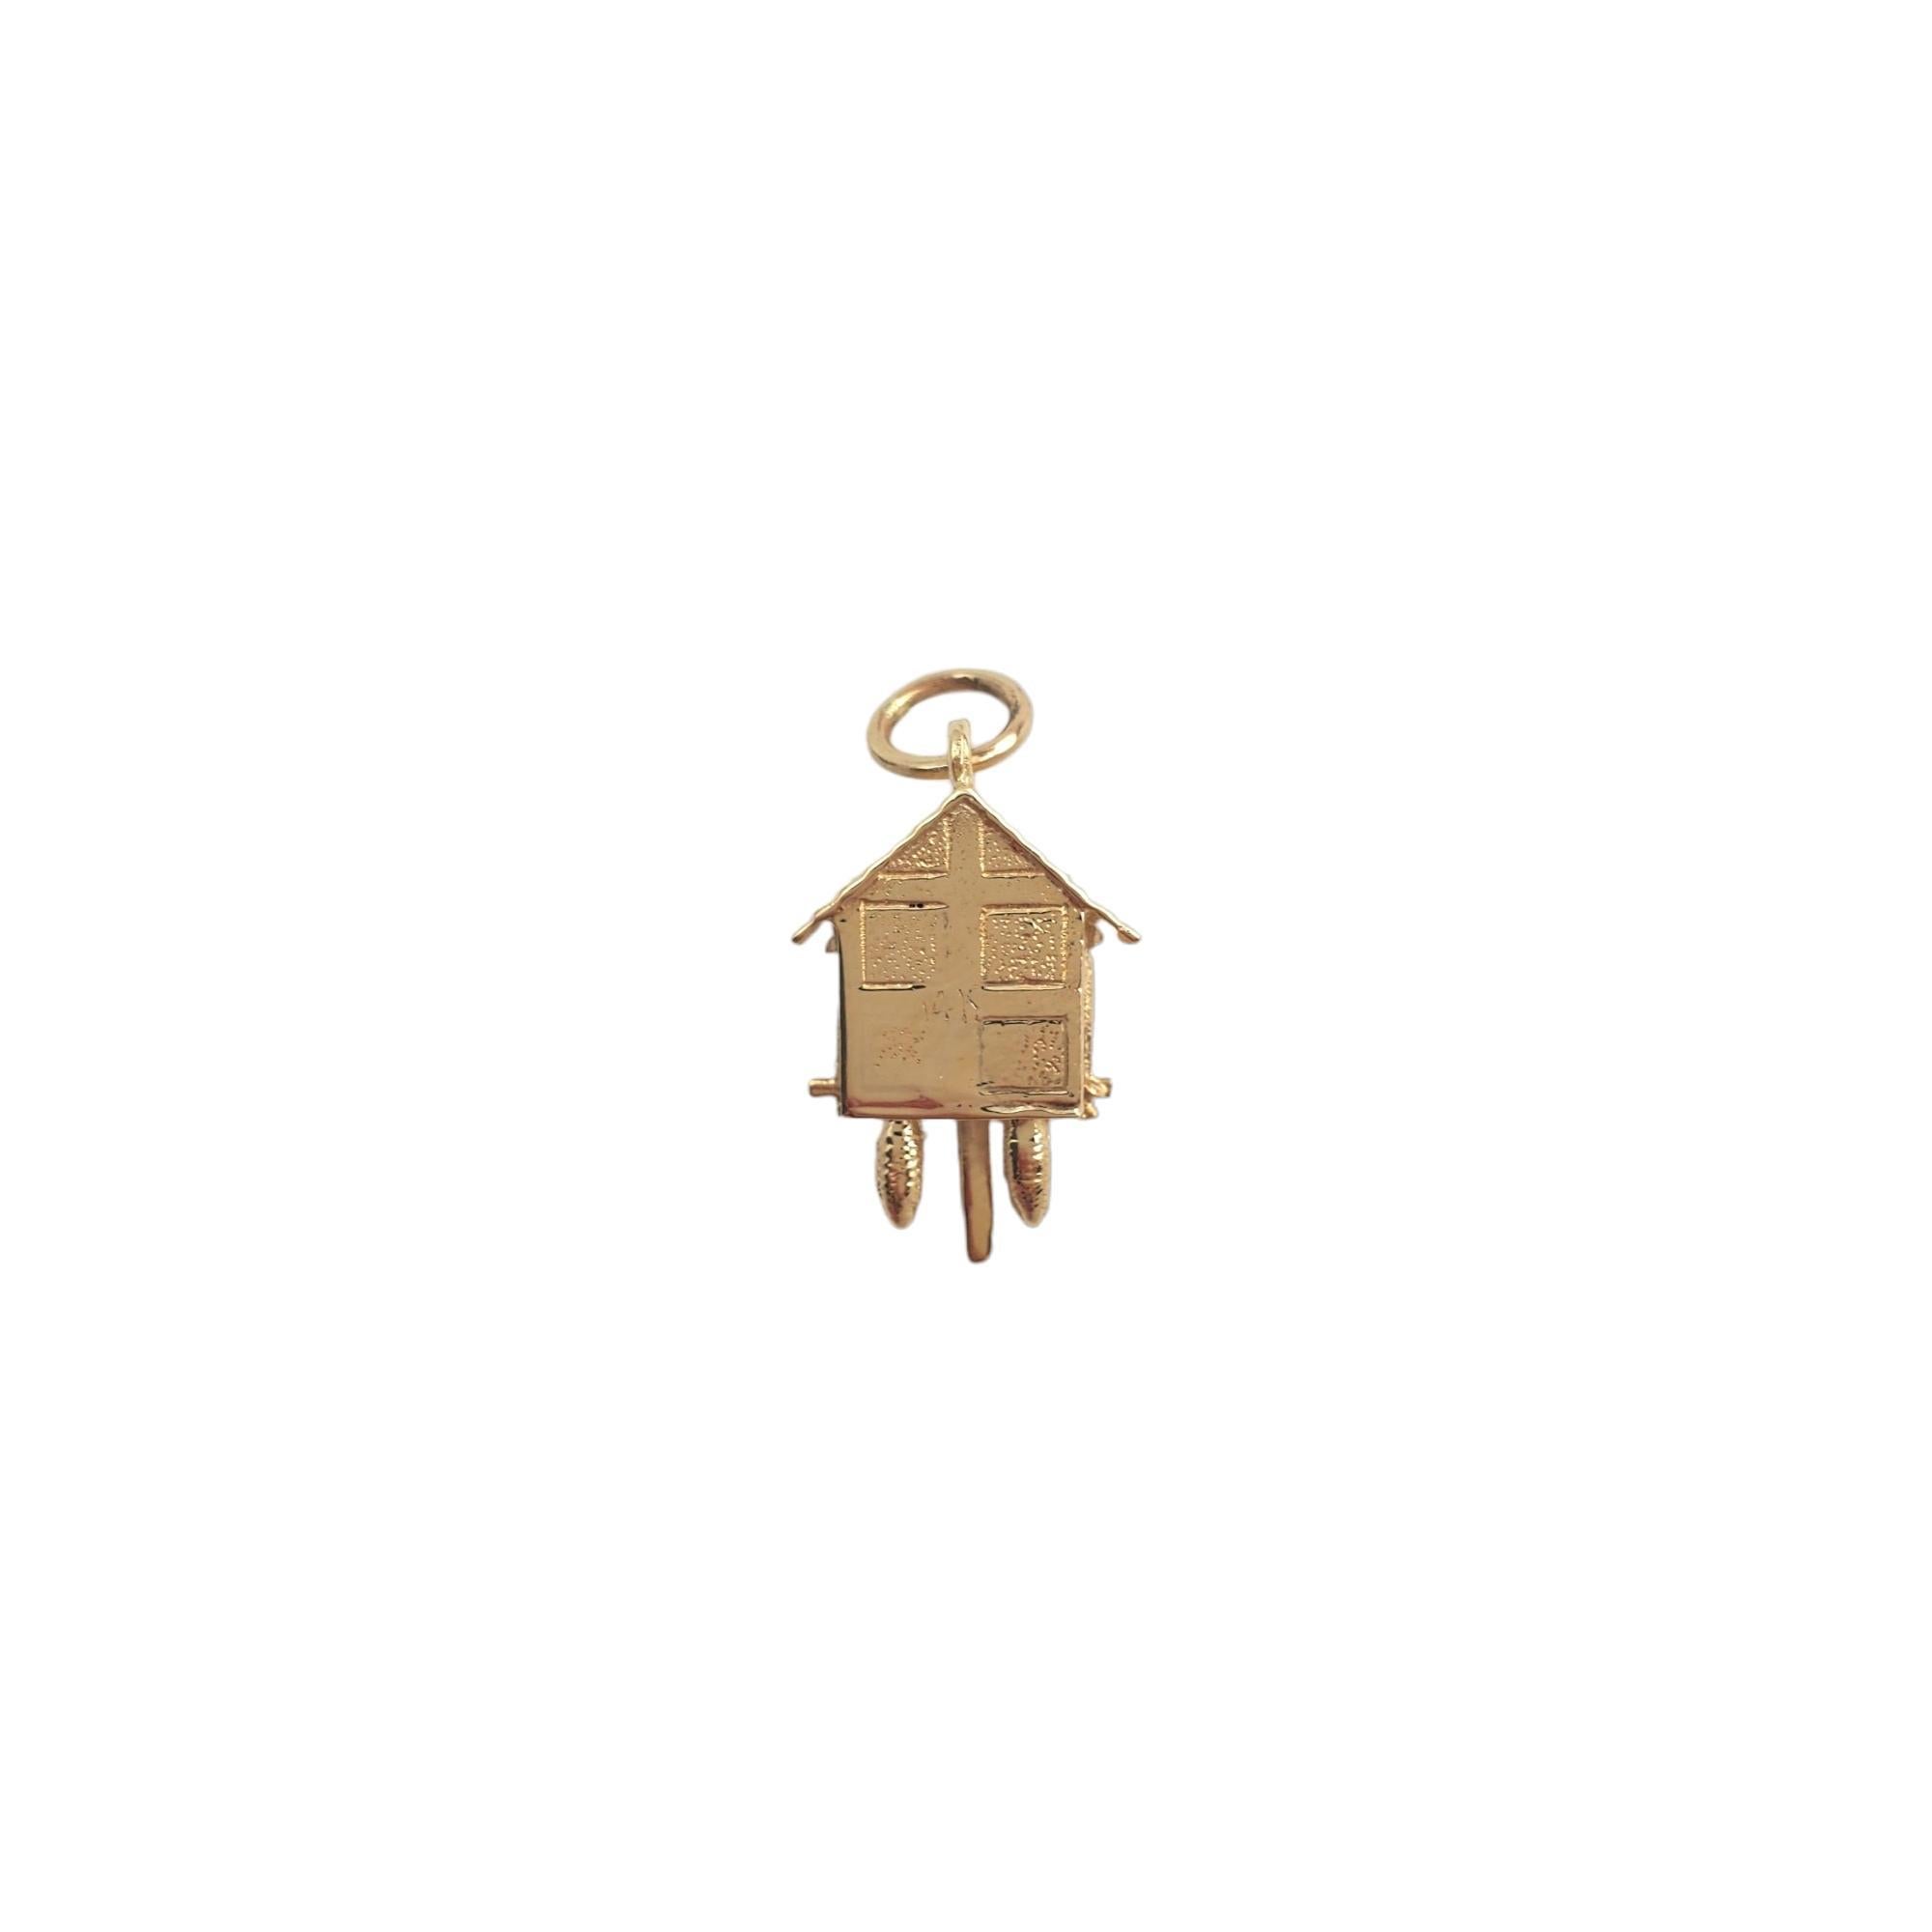 Vintage 14 karat yellow gold cuckoo clock pendant -

This miniature clock brings the nostalgia of classic timepieces and is crafted in meticulously detailed 14K yellow gold. 

Size: 22.3mm x 6.9mm

Stamped: 14K

Weight: 3.33 gr./ 2.1 dwt.

Chain not